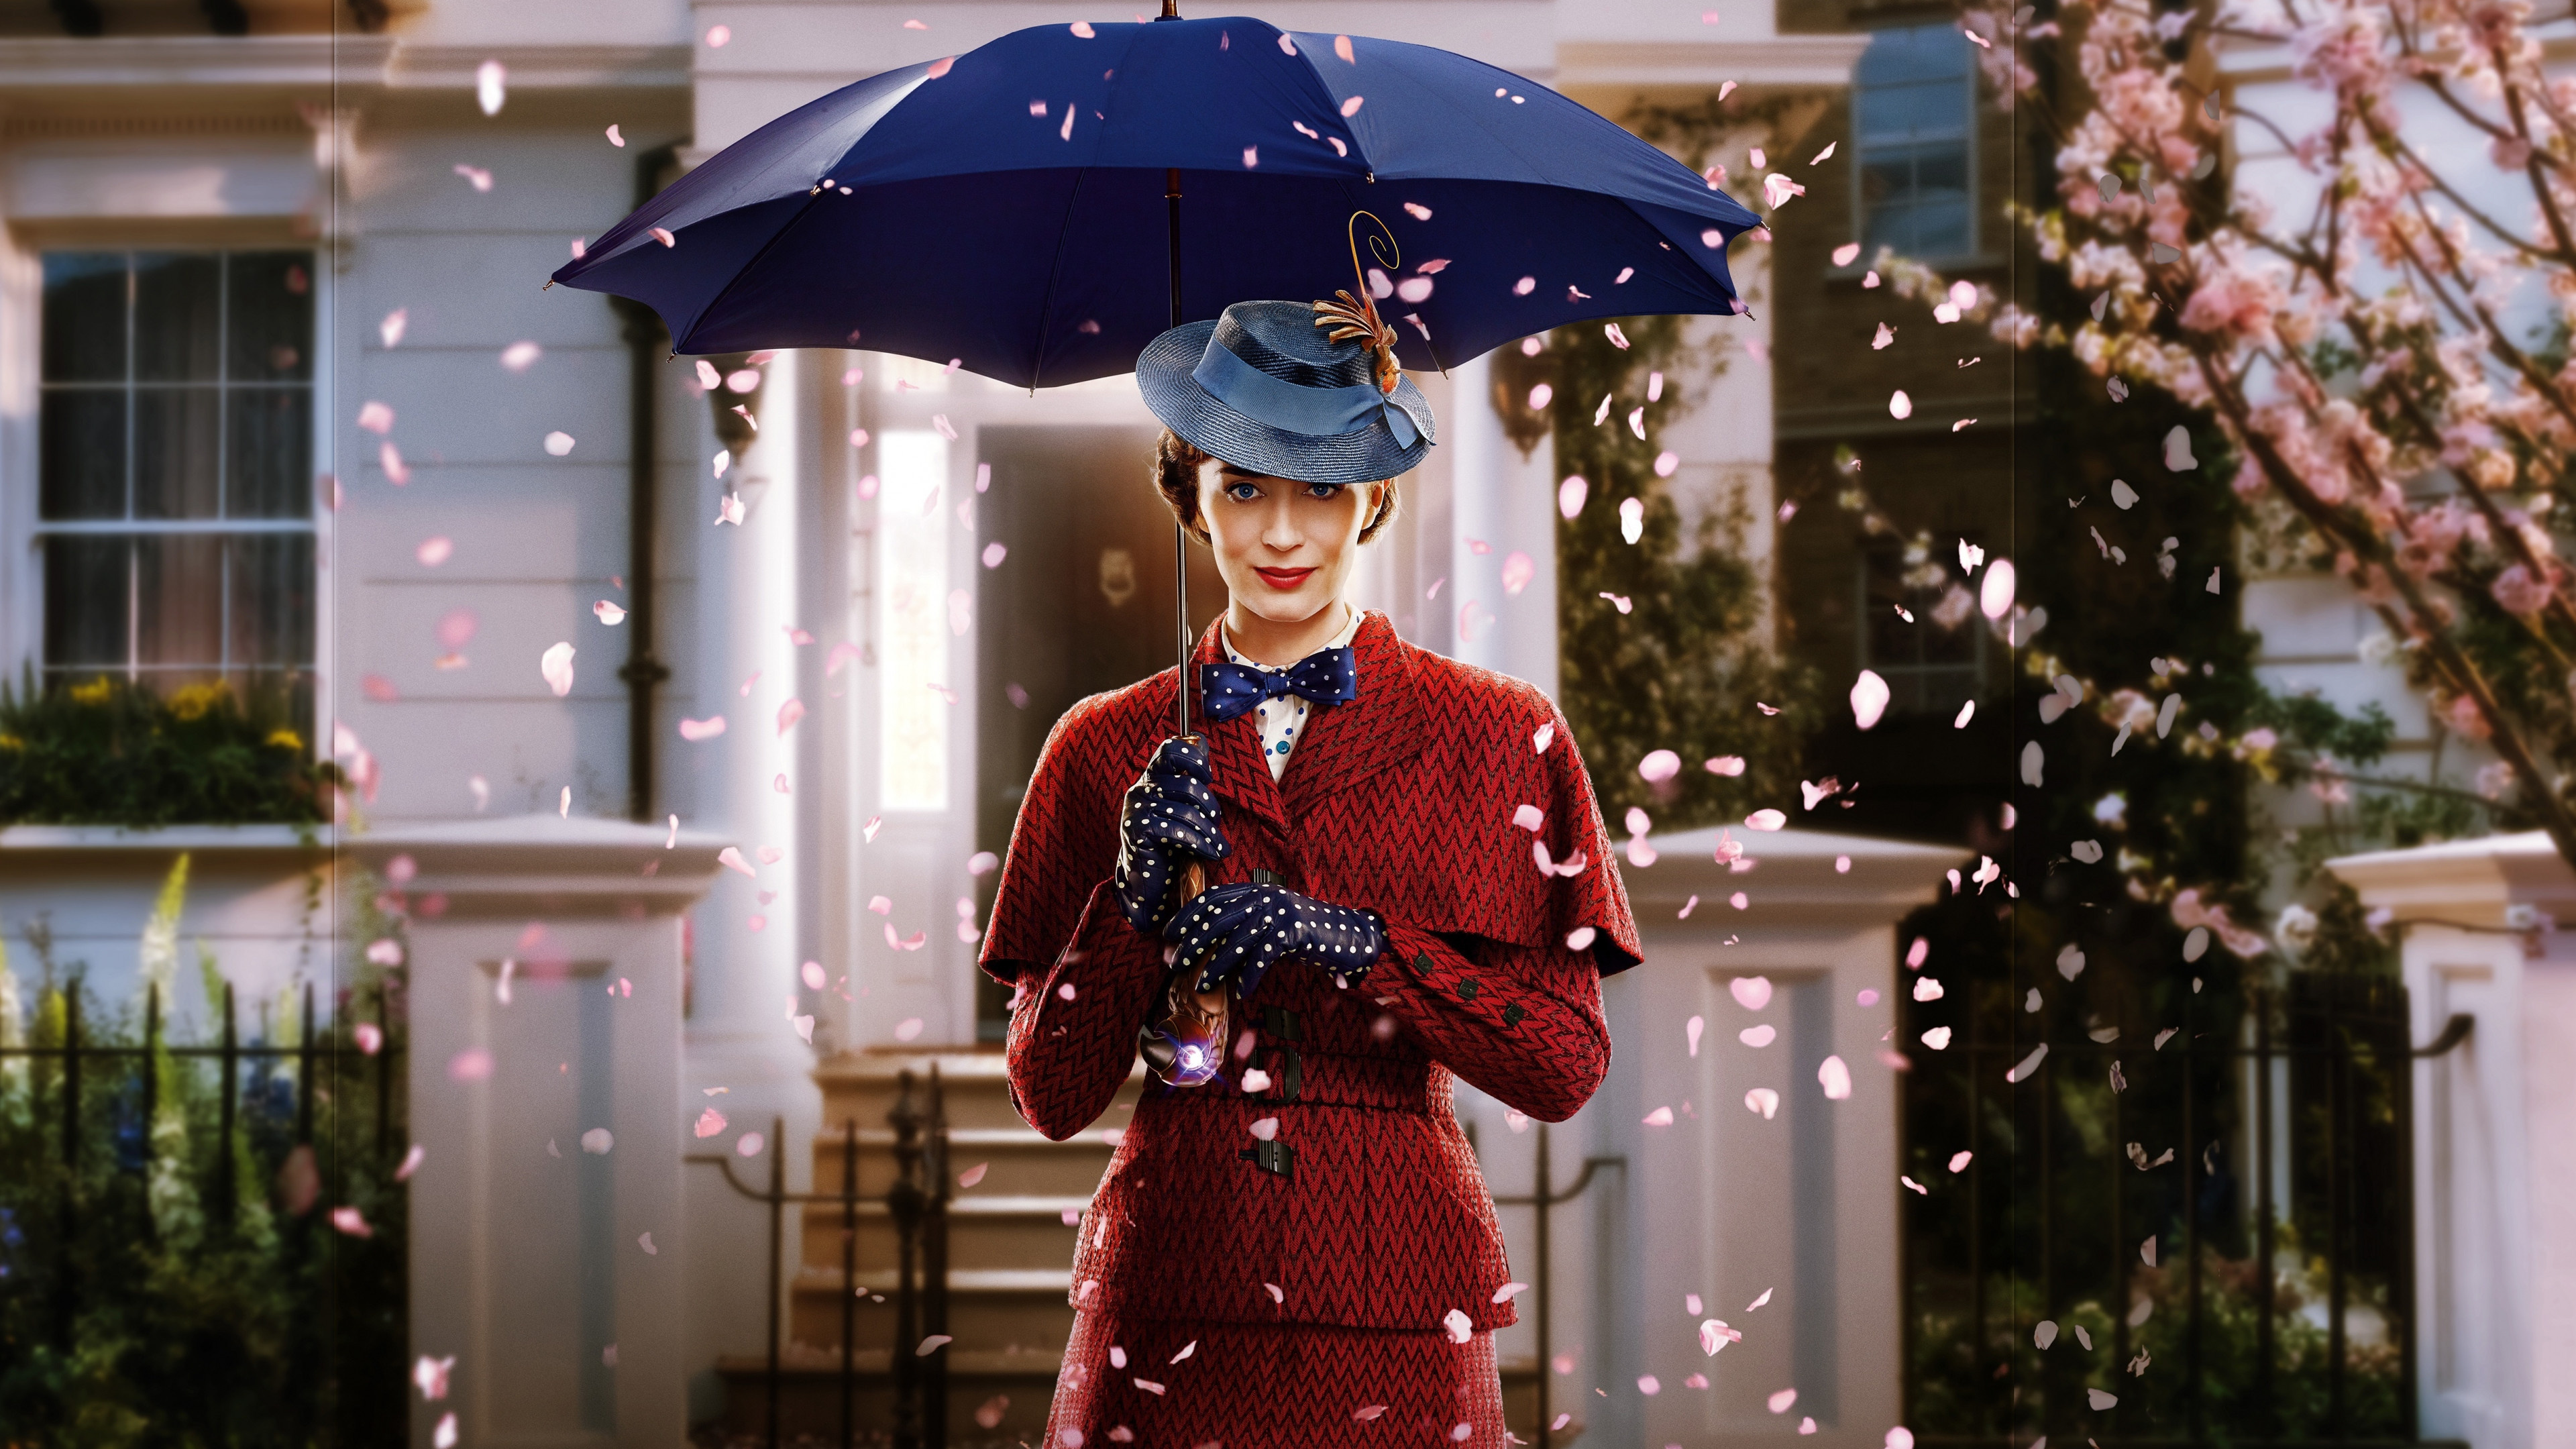 Emily Blunt: Starred as Mary Poppins in a 2018 musical fantasy film, Mary Poppins Returns. 3840x2160 4K Background.